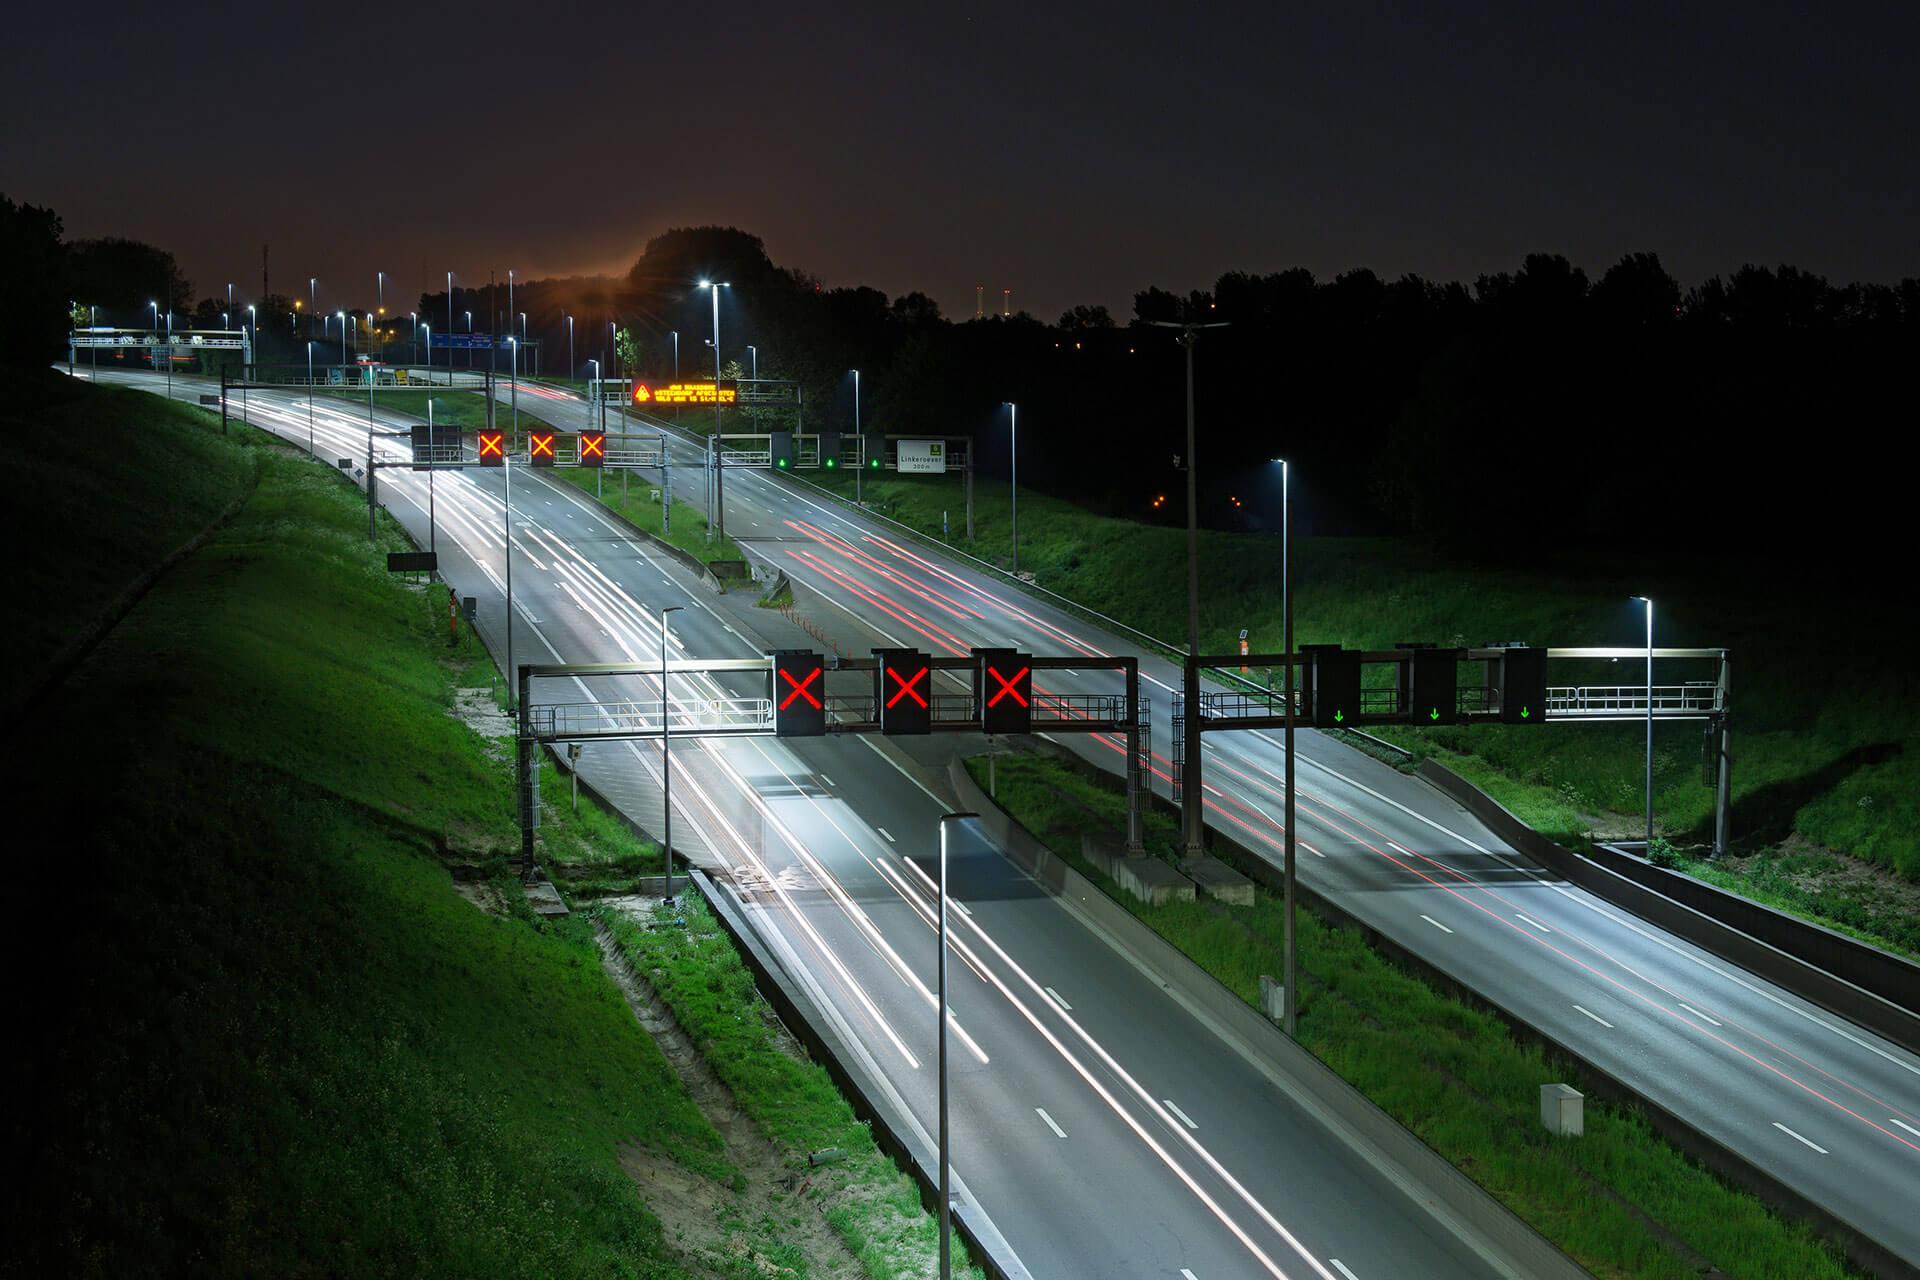 Teceo LED luminaires improve visibility significantly to reduce accidents on the E17 in Belgium